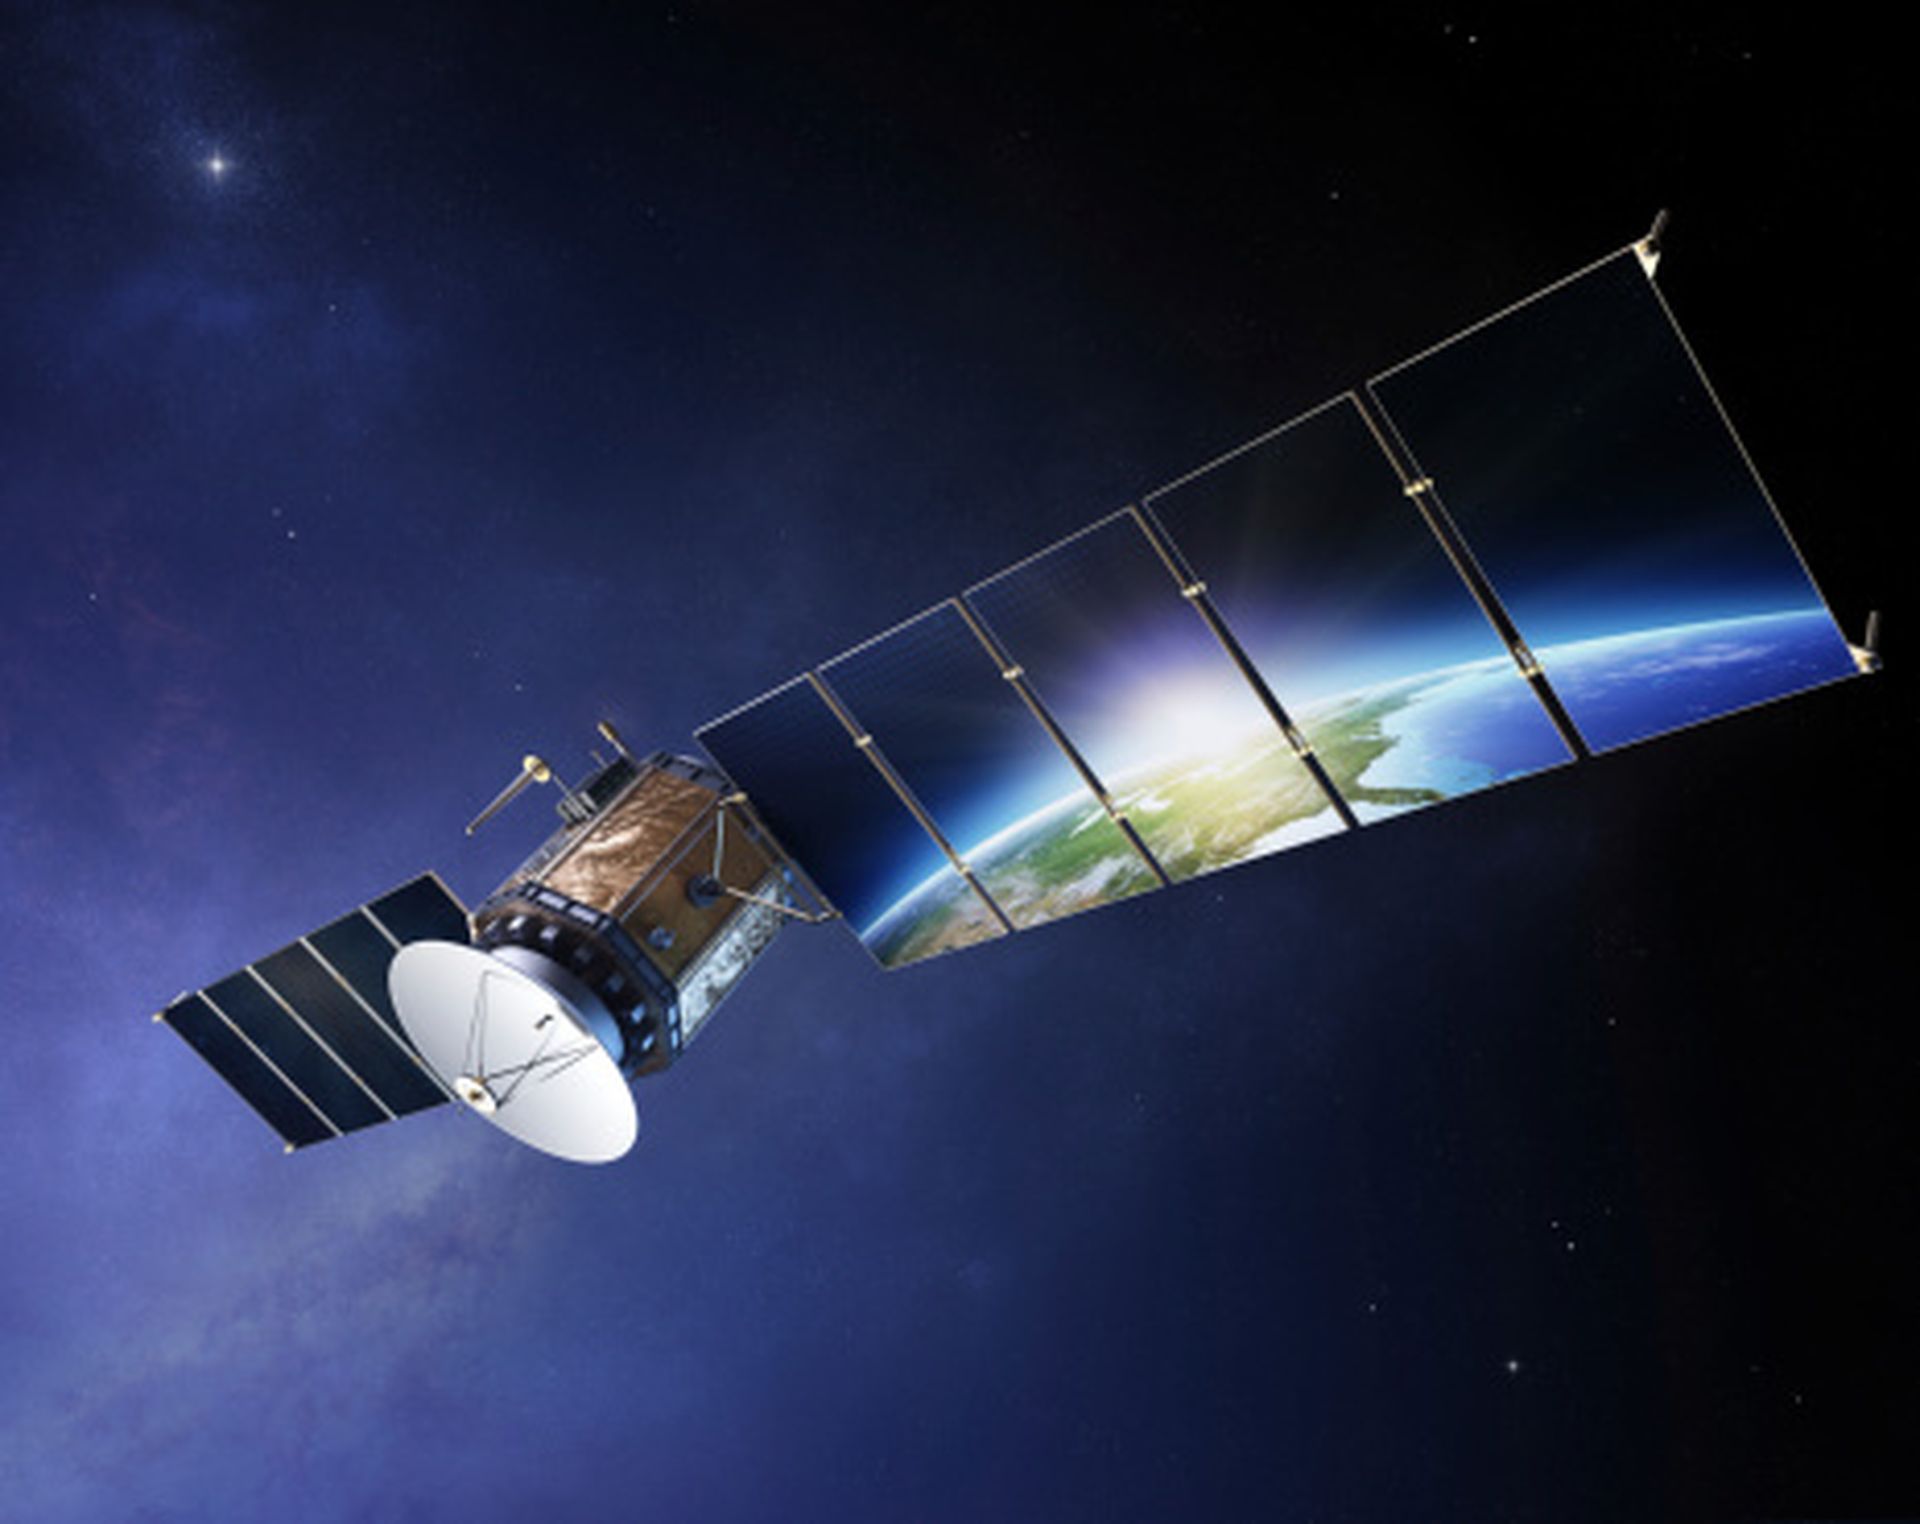 An audit of the Joint Polar Satellite System ground system revealed thousands of vulnerabilities, most of which will be addressed in two years when the next version of the system is released. Read more